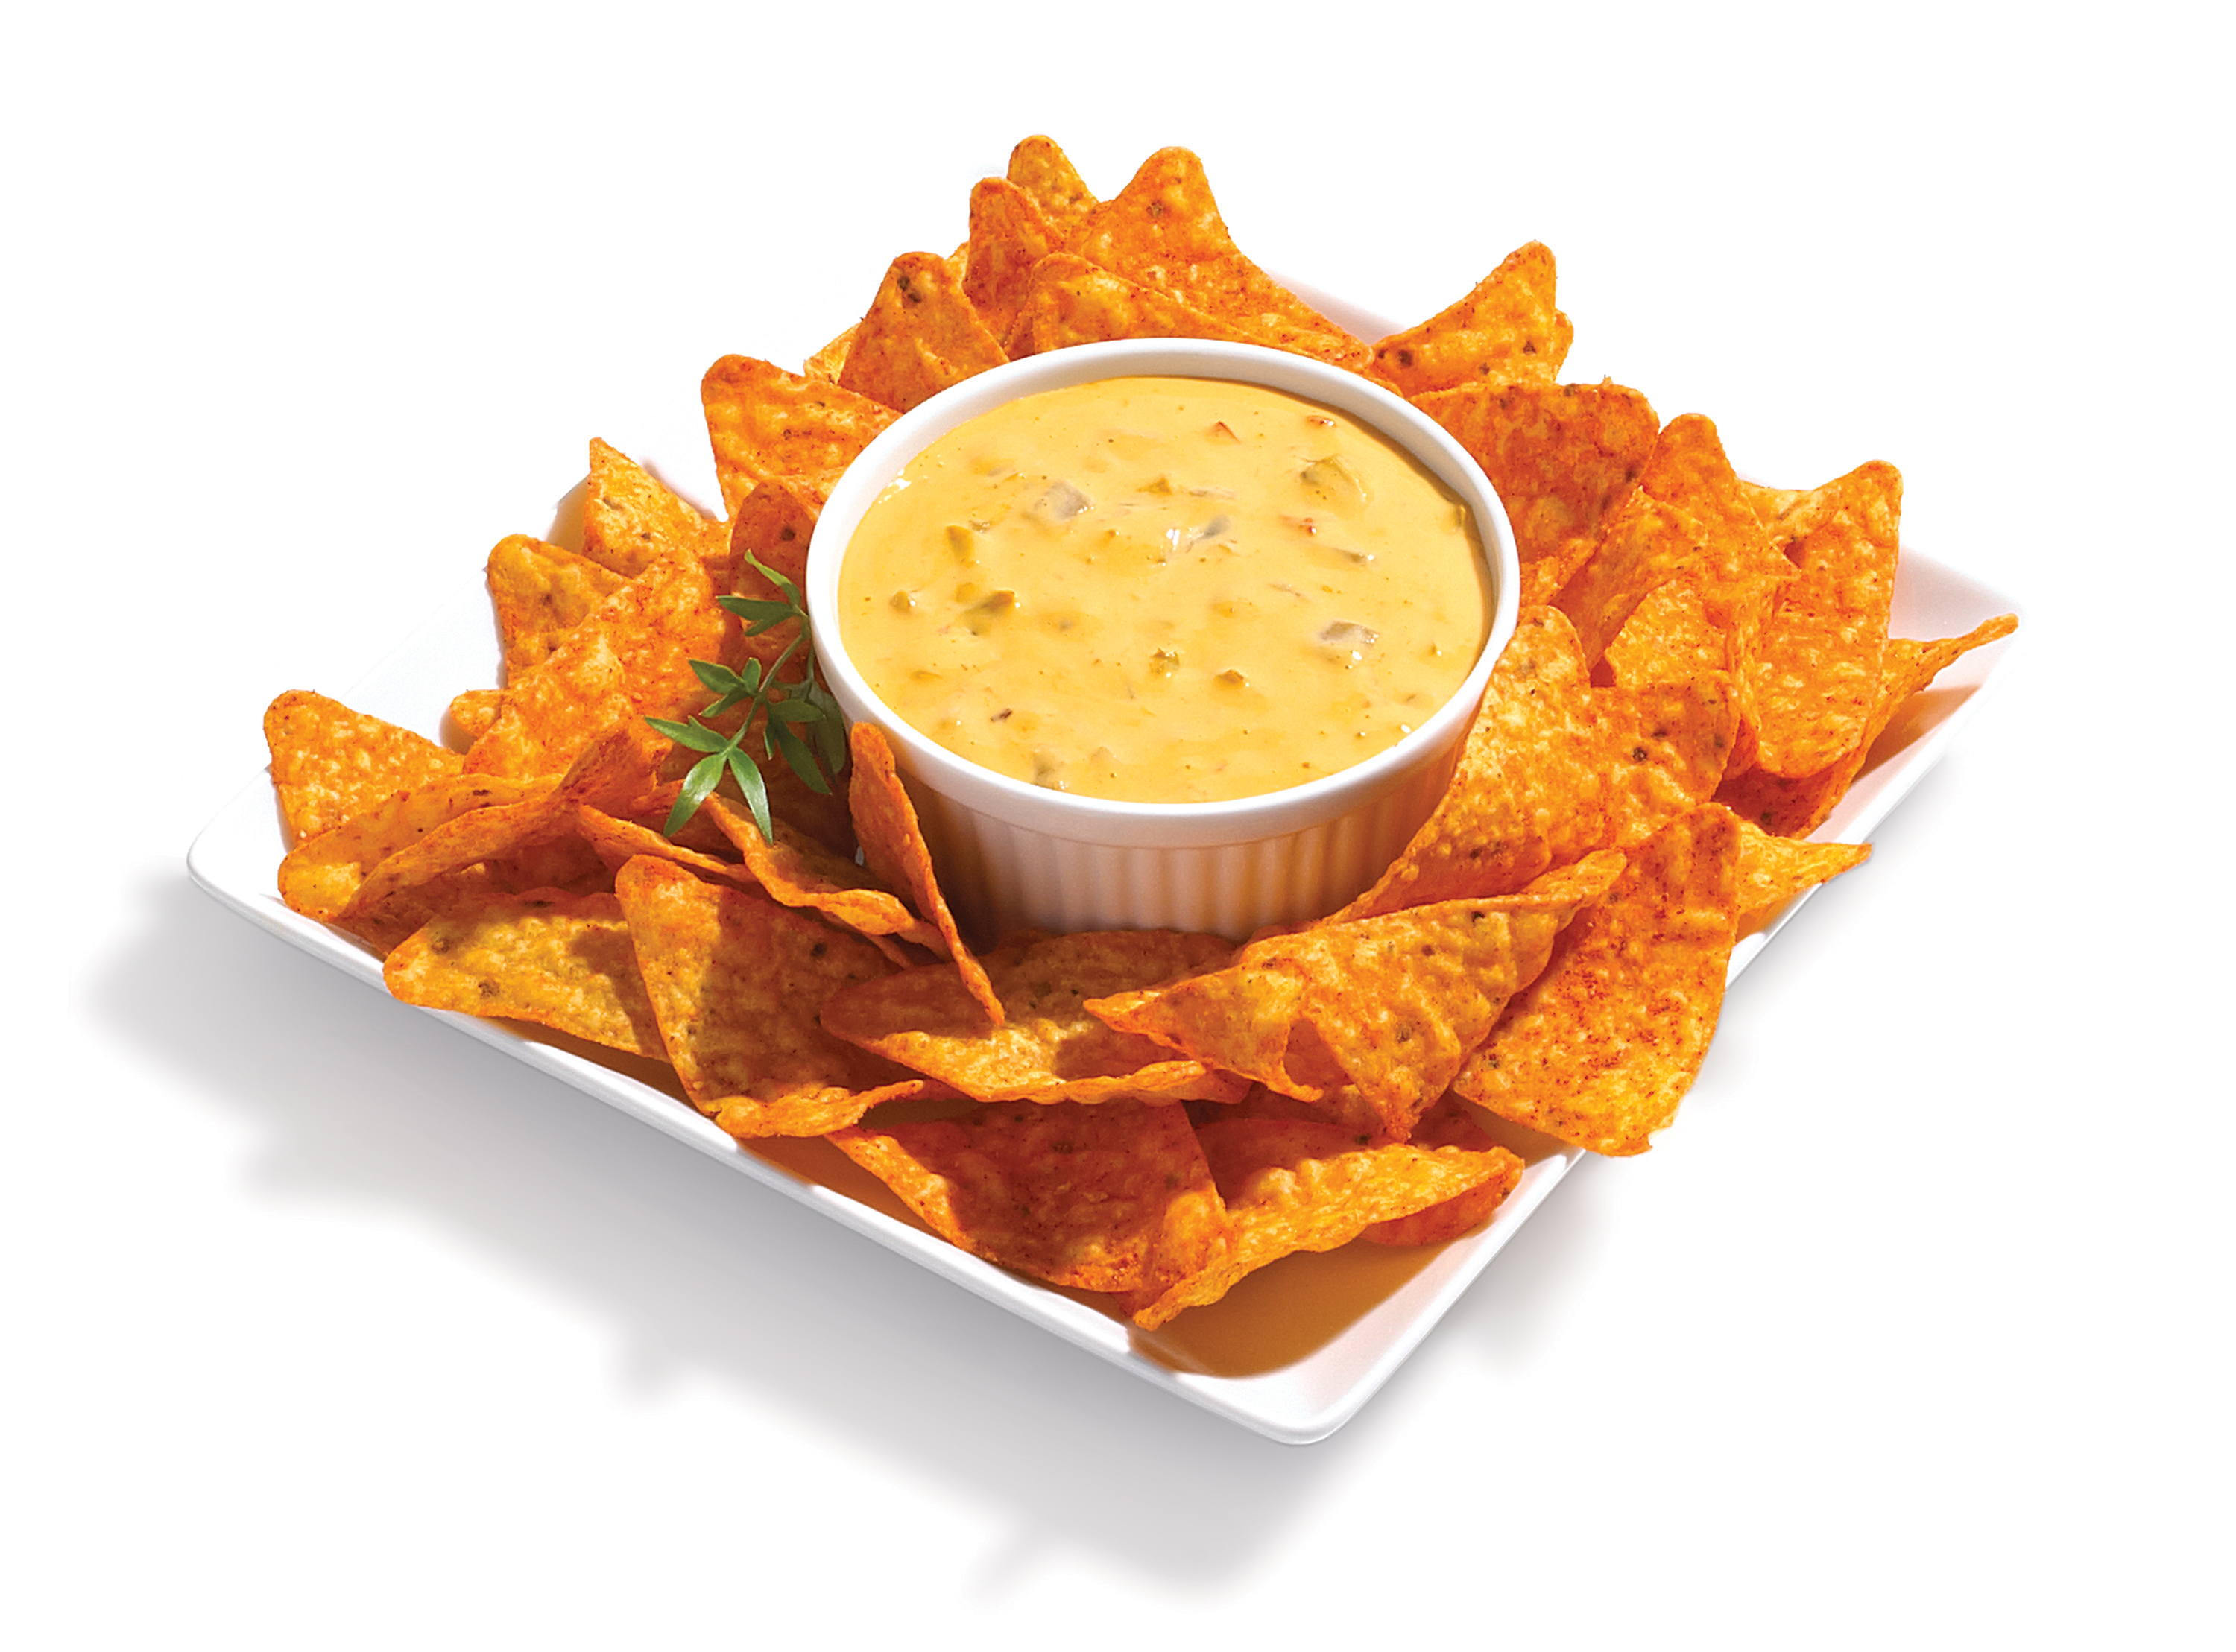 Cheese dip is one type of food that Kalsec's natural colors derived from carrots might go into.